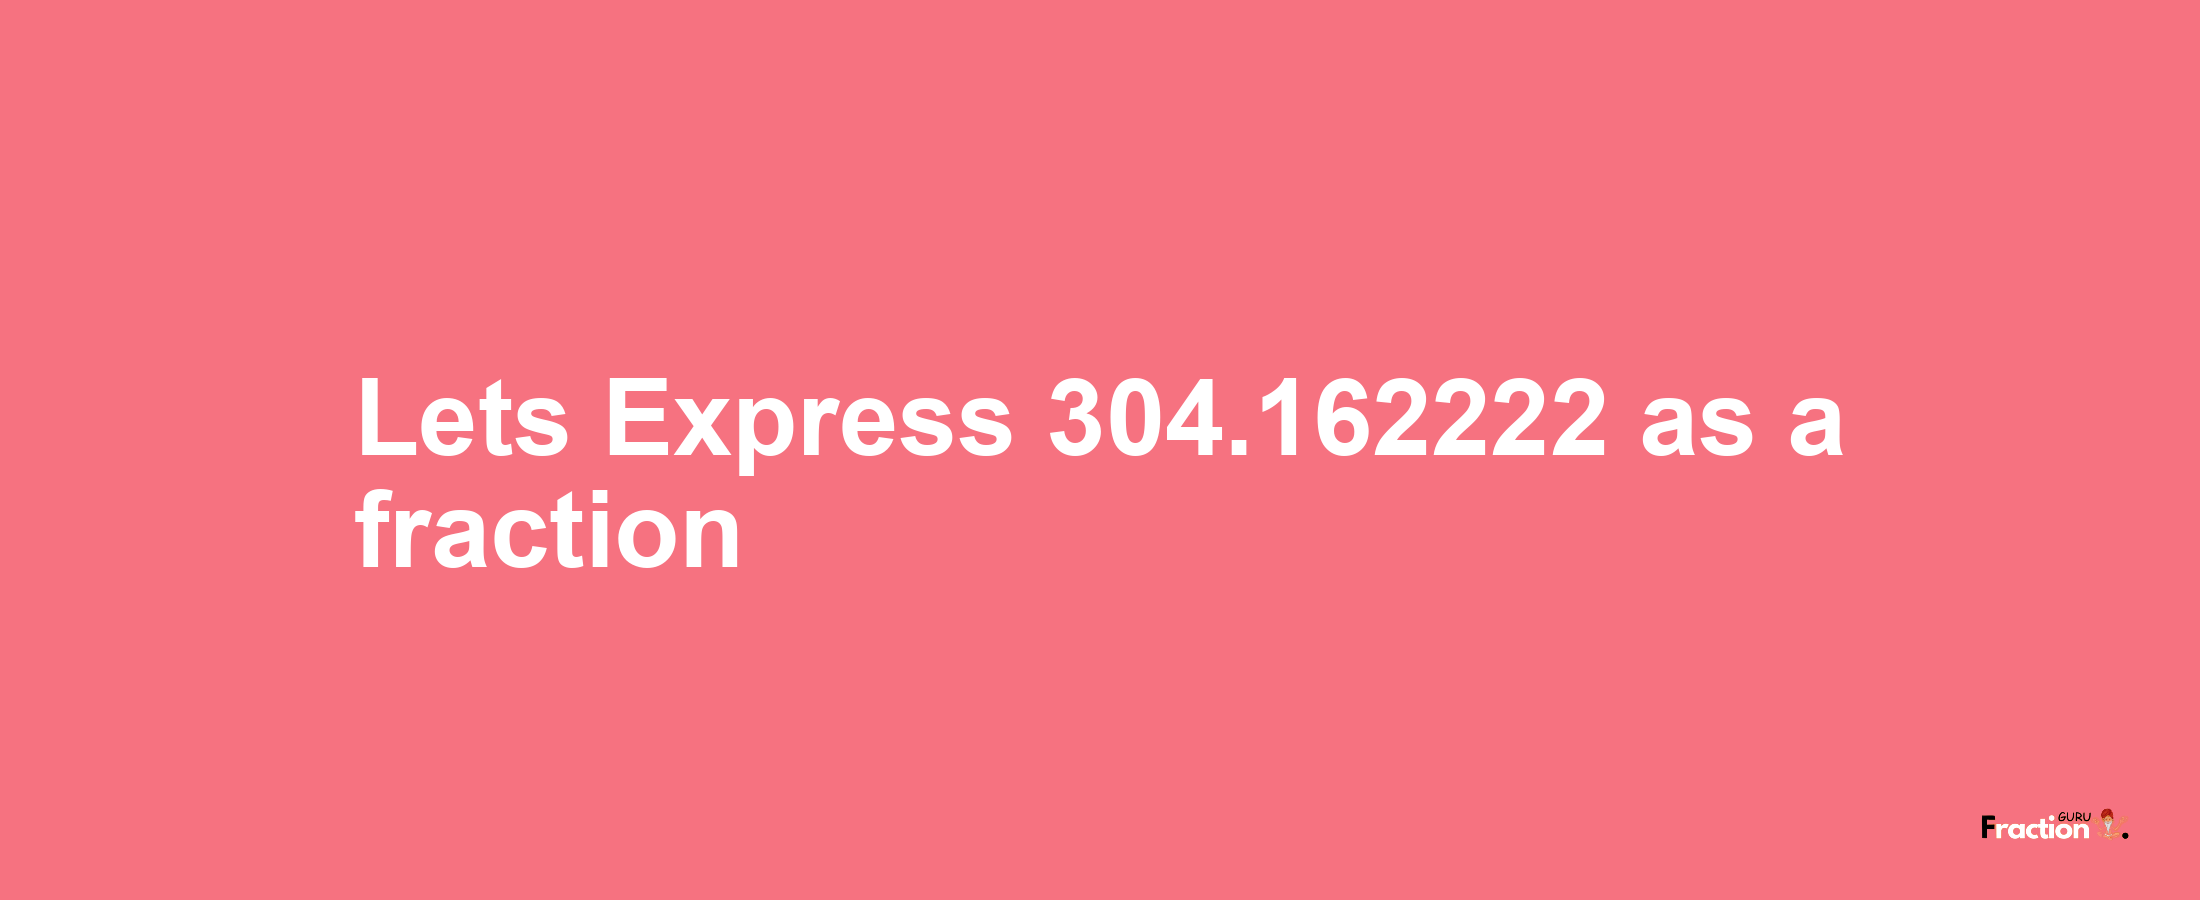 Lets Express 304.162222 as afraction